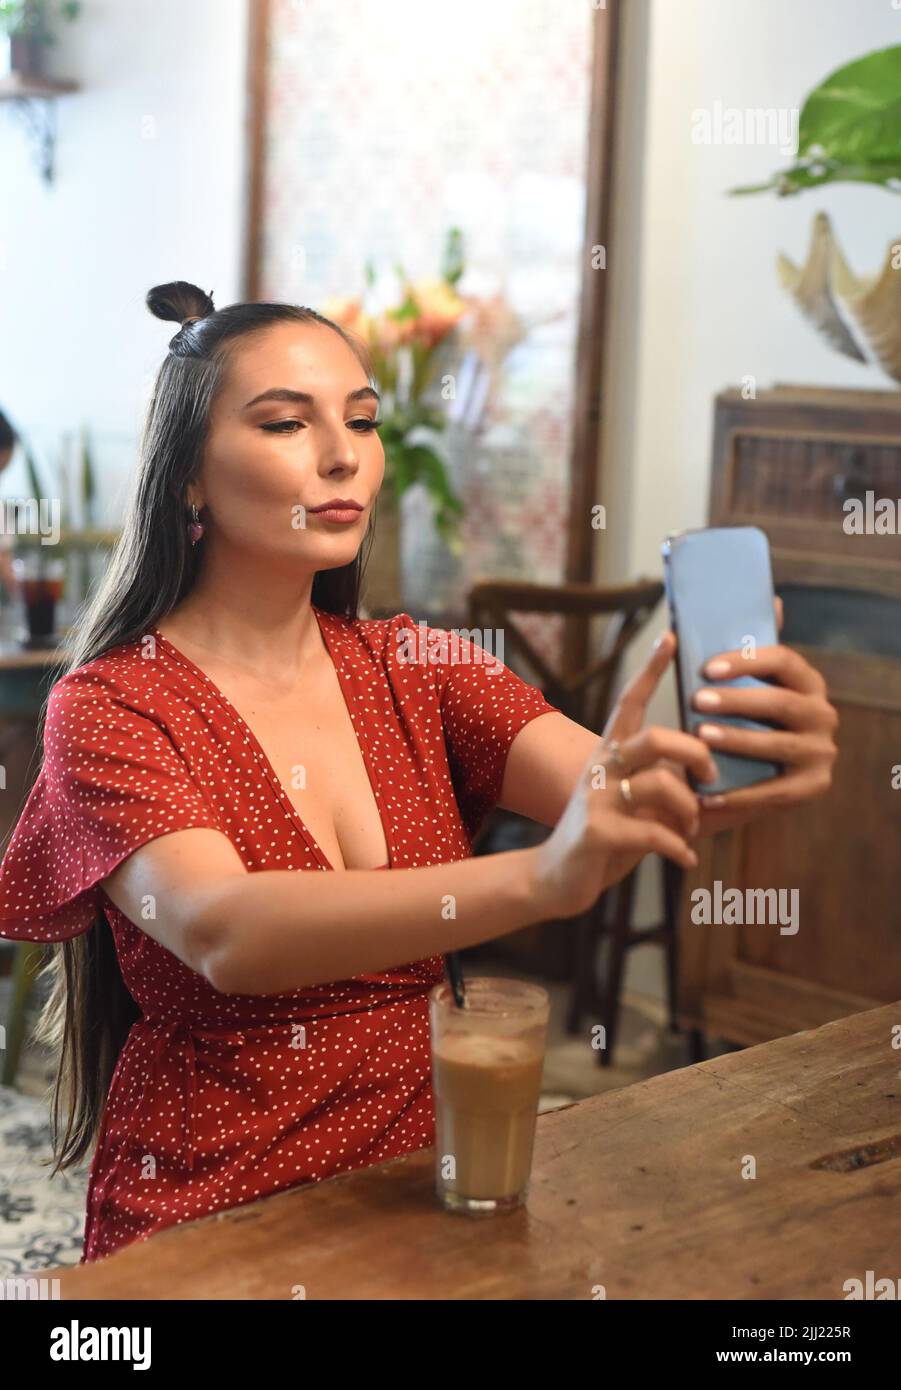 Young woman taking selfie in a coffee shop Stock Photo